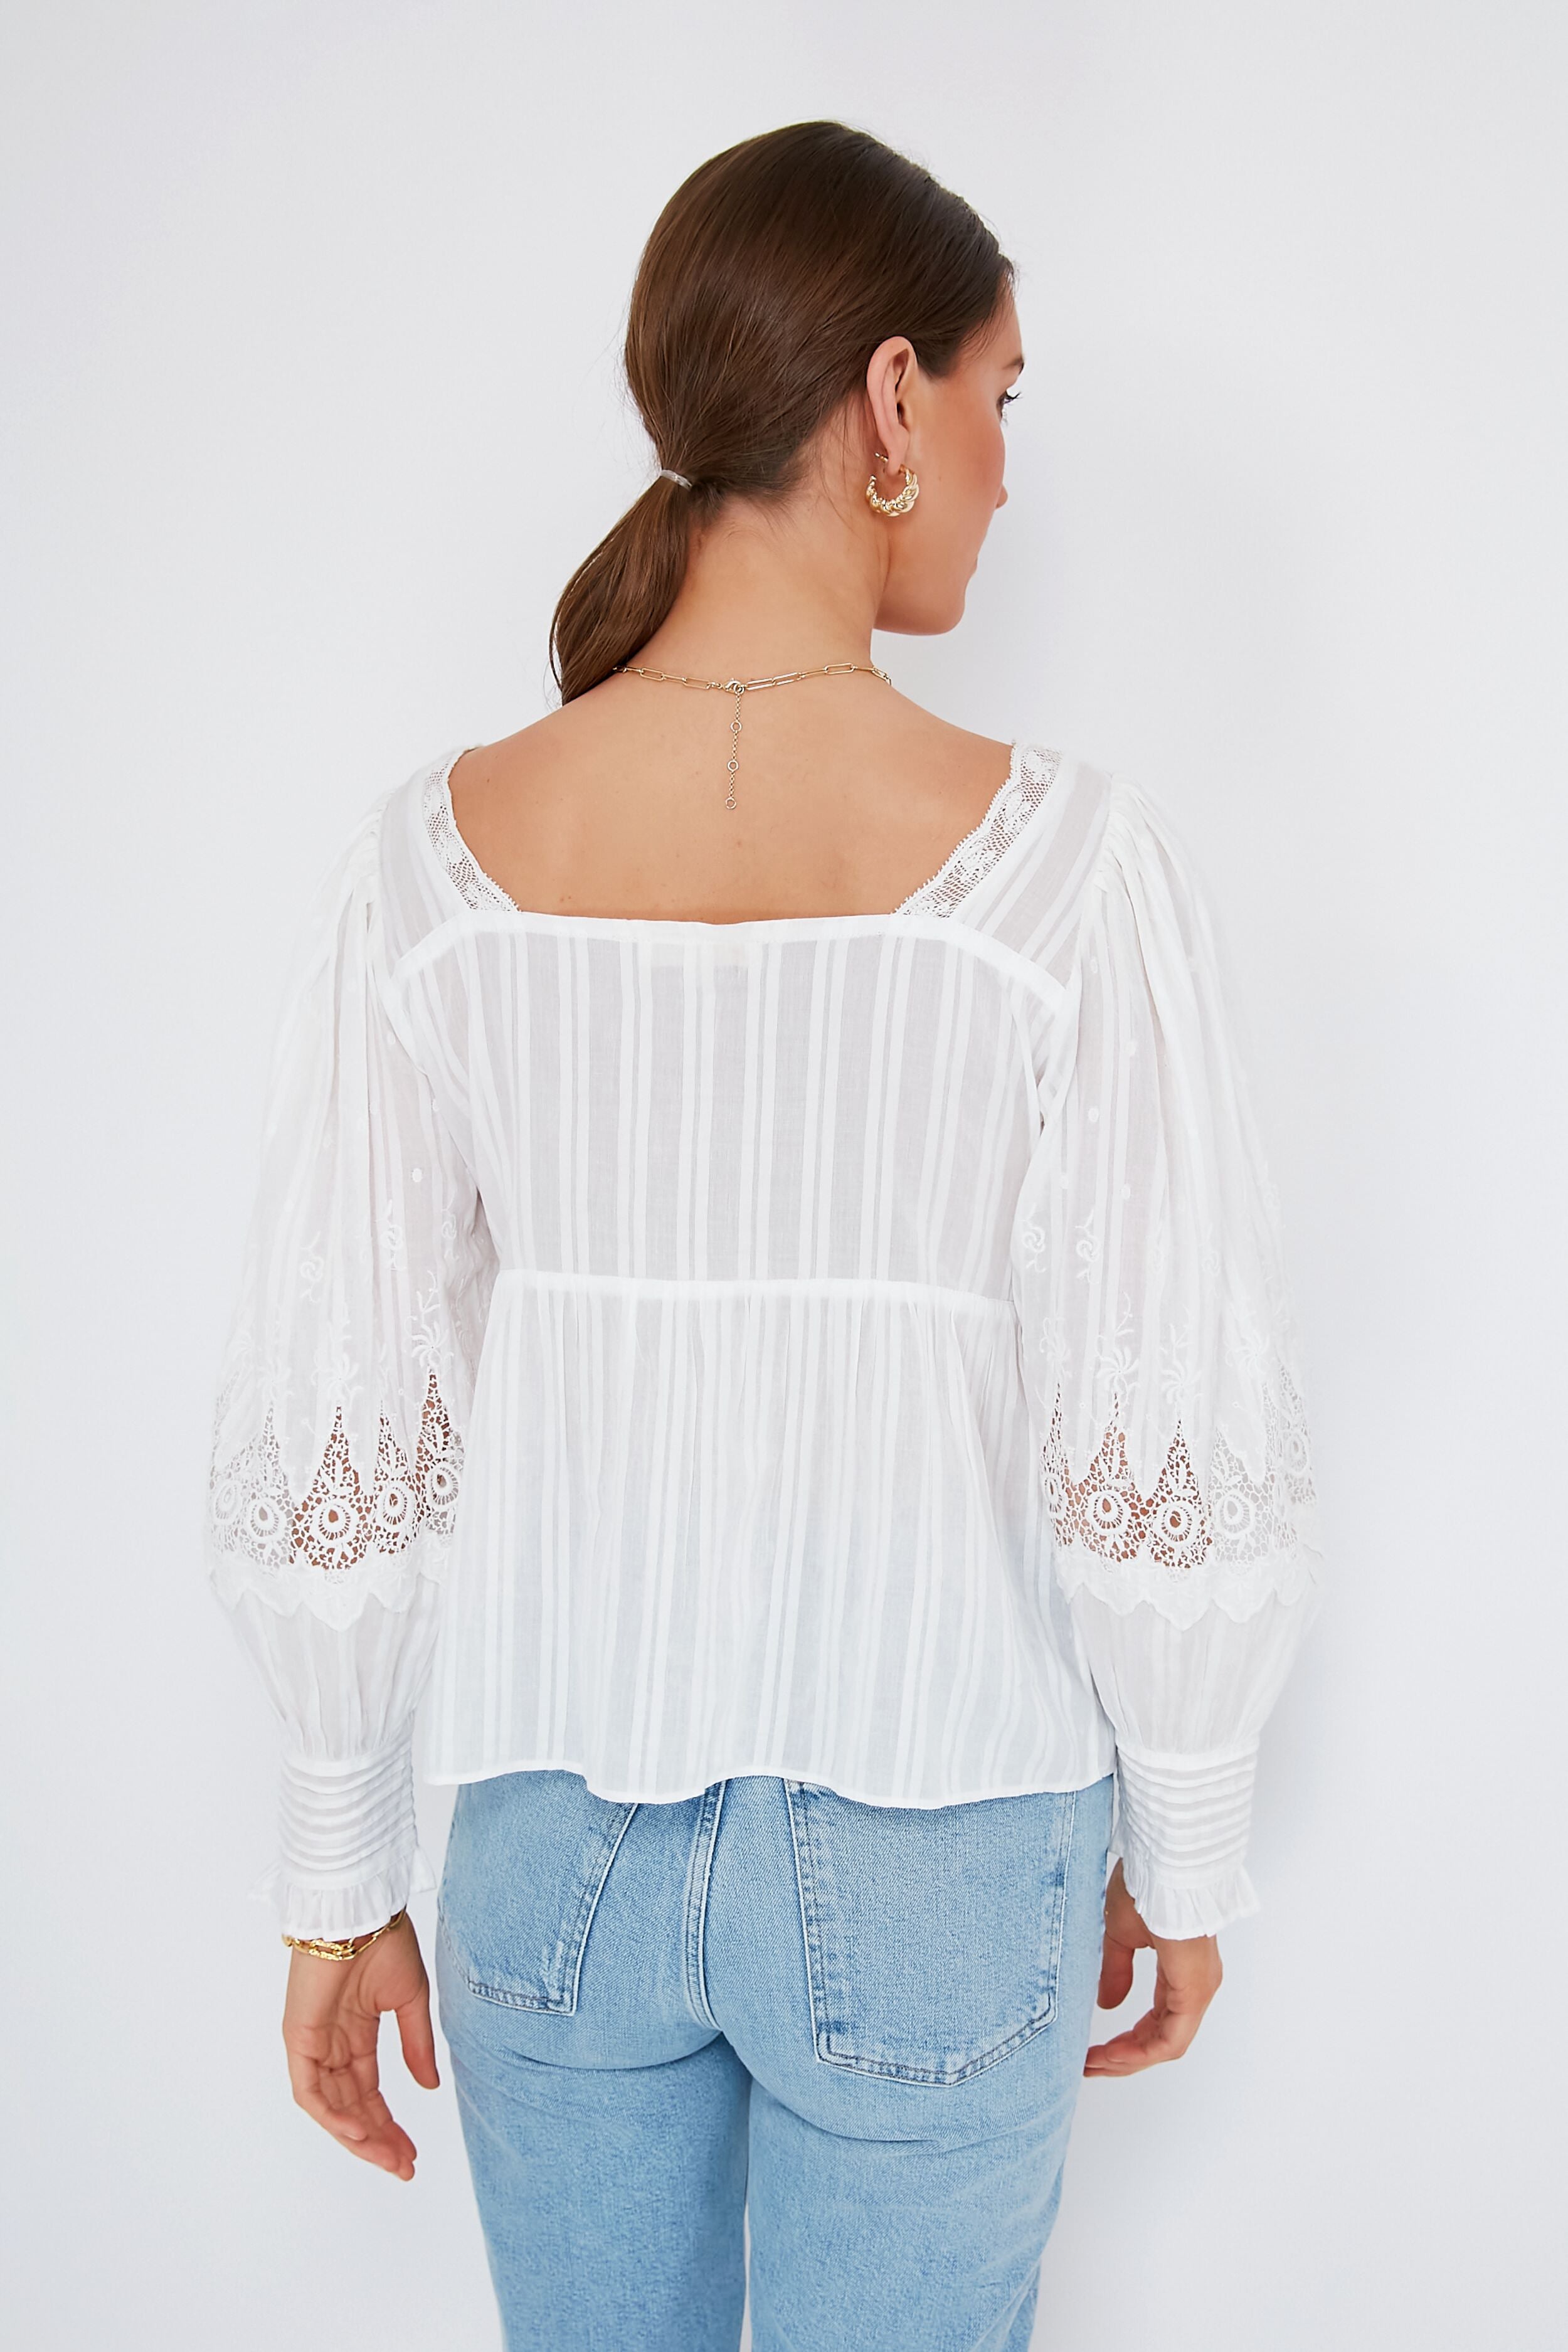 Anorette Blouse - Over the Top